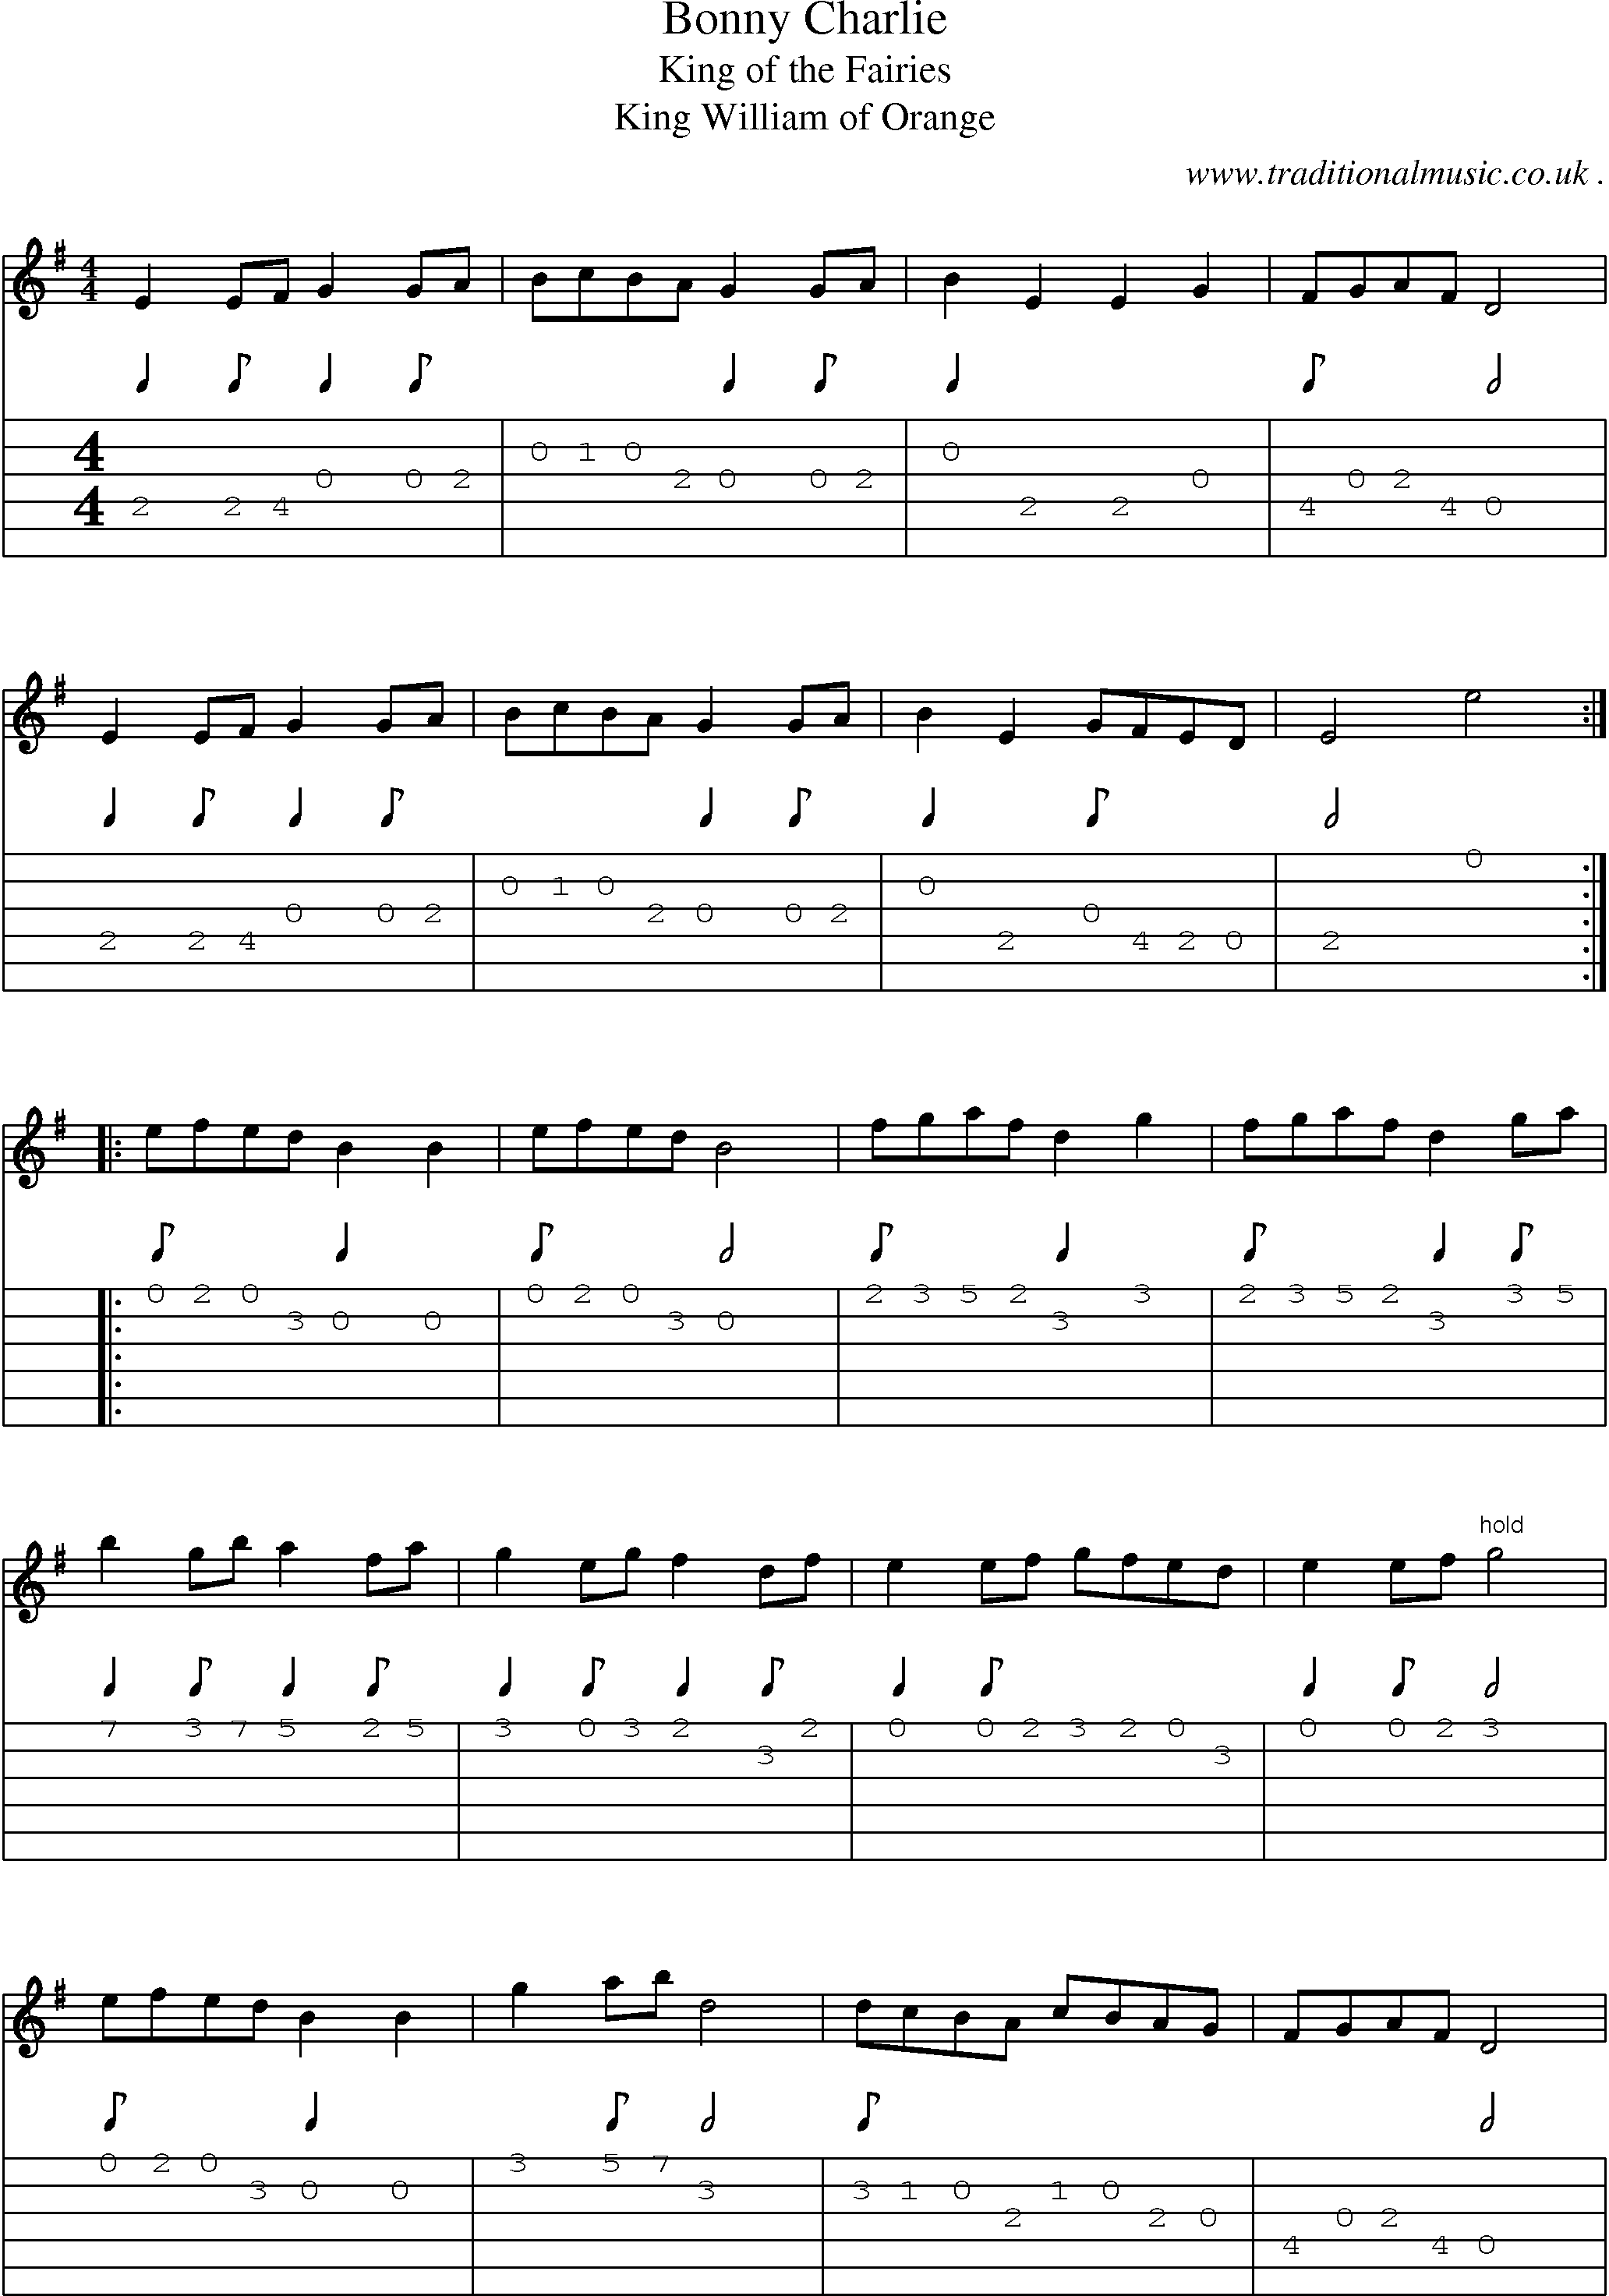 Sheet-Music and Guitar Tabs for Bonny Charlie